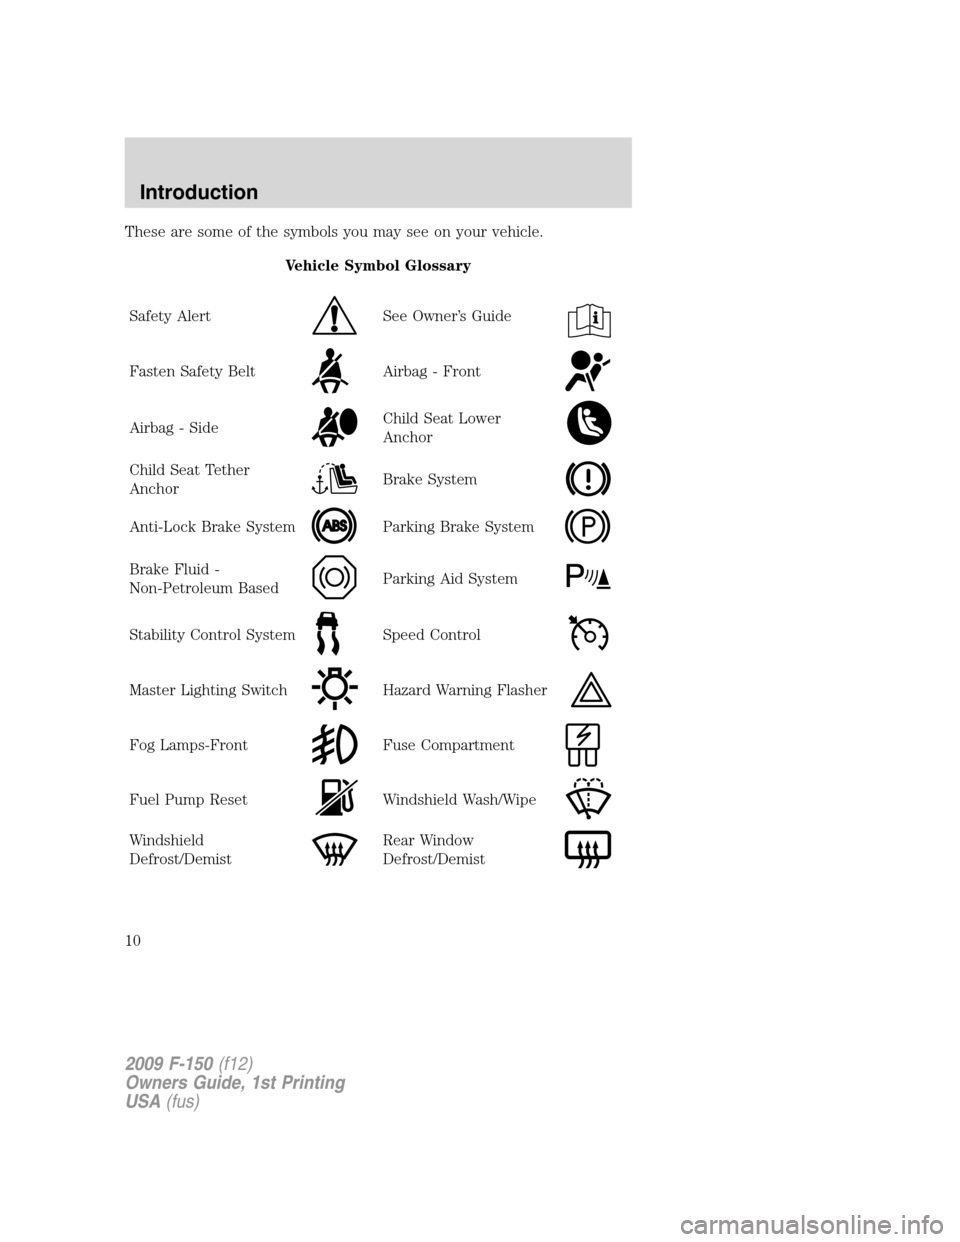 FORD F150 2009 12.G Owners Manual These are some of the symbols you may see on your vehicle.
Vehicle Symbol Glossary
Safety Alert
See Owner’s Guide
Fasten Safety BeltAirbag - Front
Airbag - SideChild Seat Lower
Anchor
Child Seat Tet